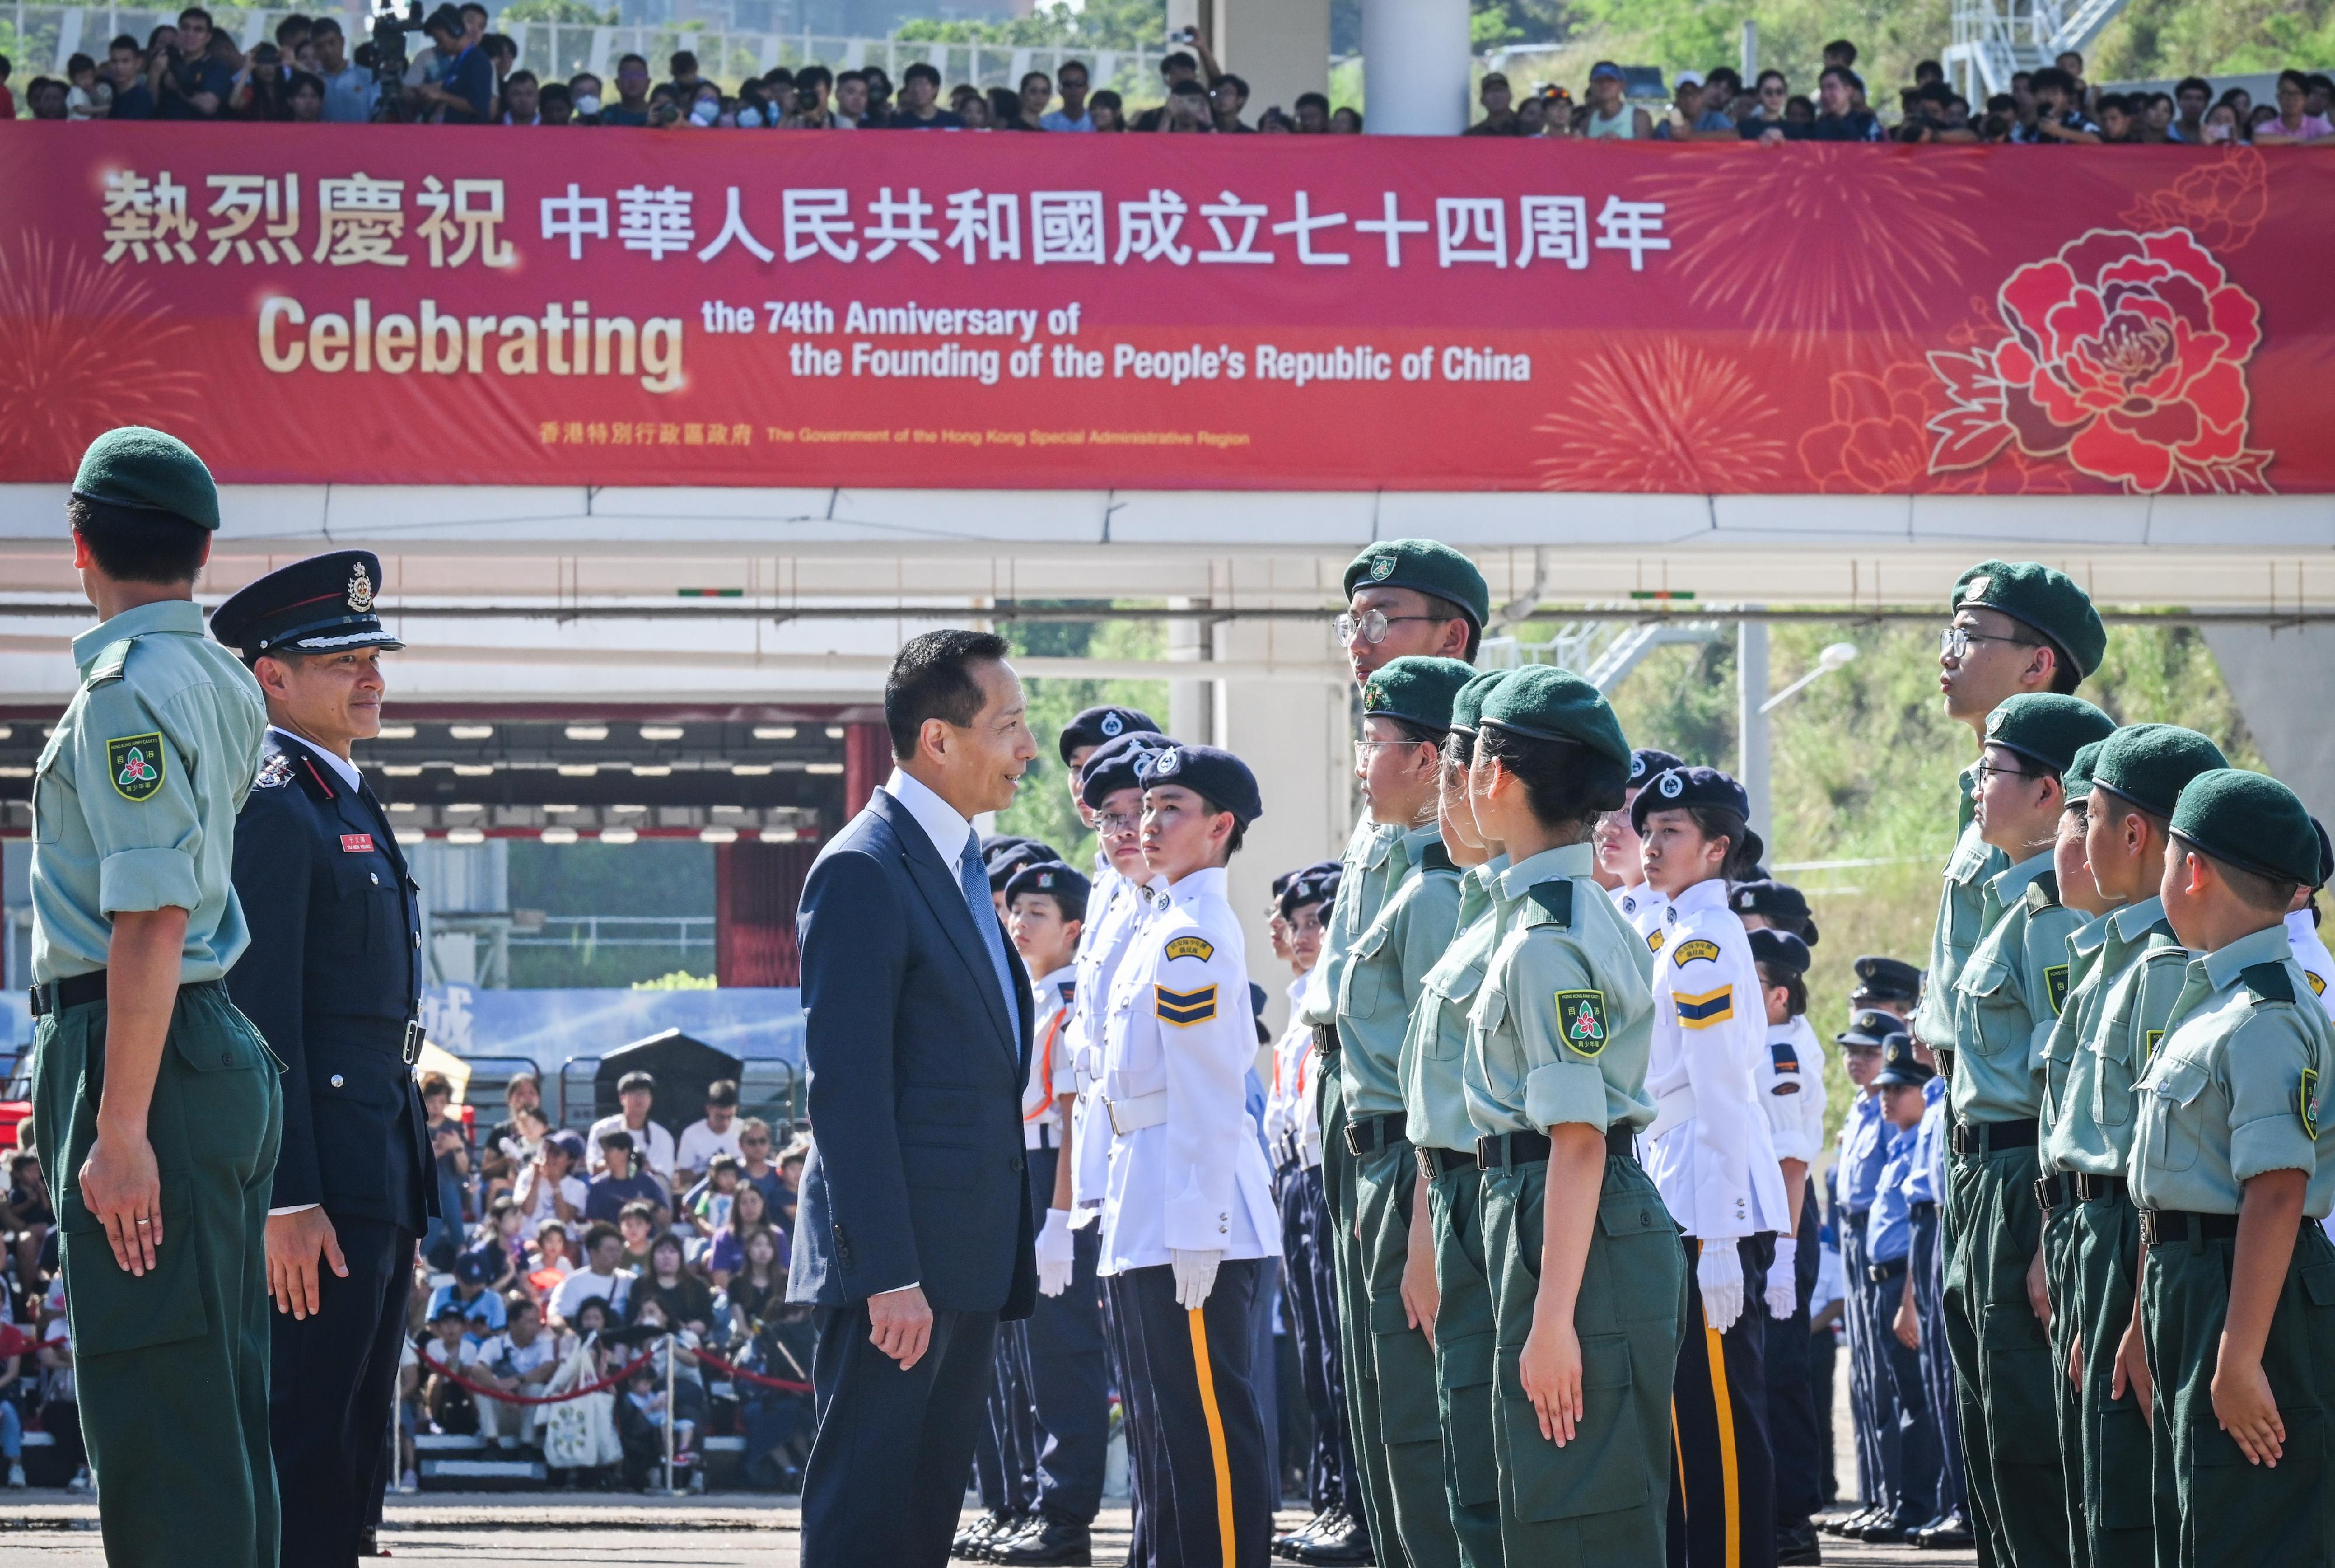 The Security Bureau led its disciplined services and auxiliary services, together with youth uniformed groups, to hold the Parade by Disciplined Services and Youth Groups cum Carnival for Celebrating the 74th Anniversary of the Founding of the People's Republic of China at the Fire and Ambulance Services Academy in Tseung Kwan O today (October 1) to celebrate the National Day with members of the public. Photo shows the officiating guest Mr Tang Yat-sun (third left) inspecting the disciplined services ceremonial guard and the youth uniformed groups.